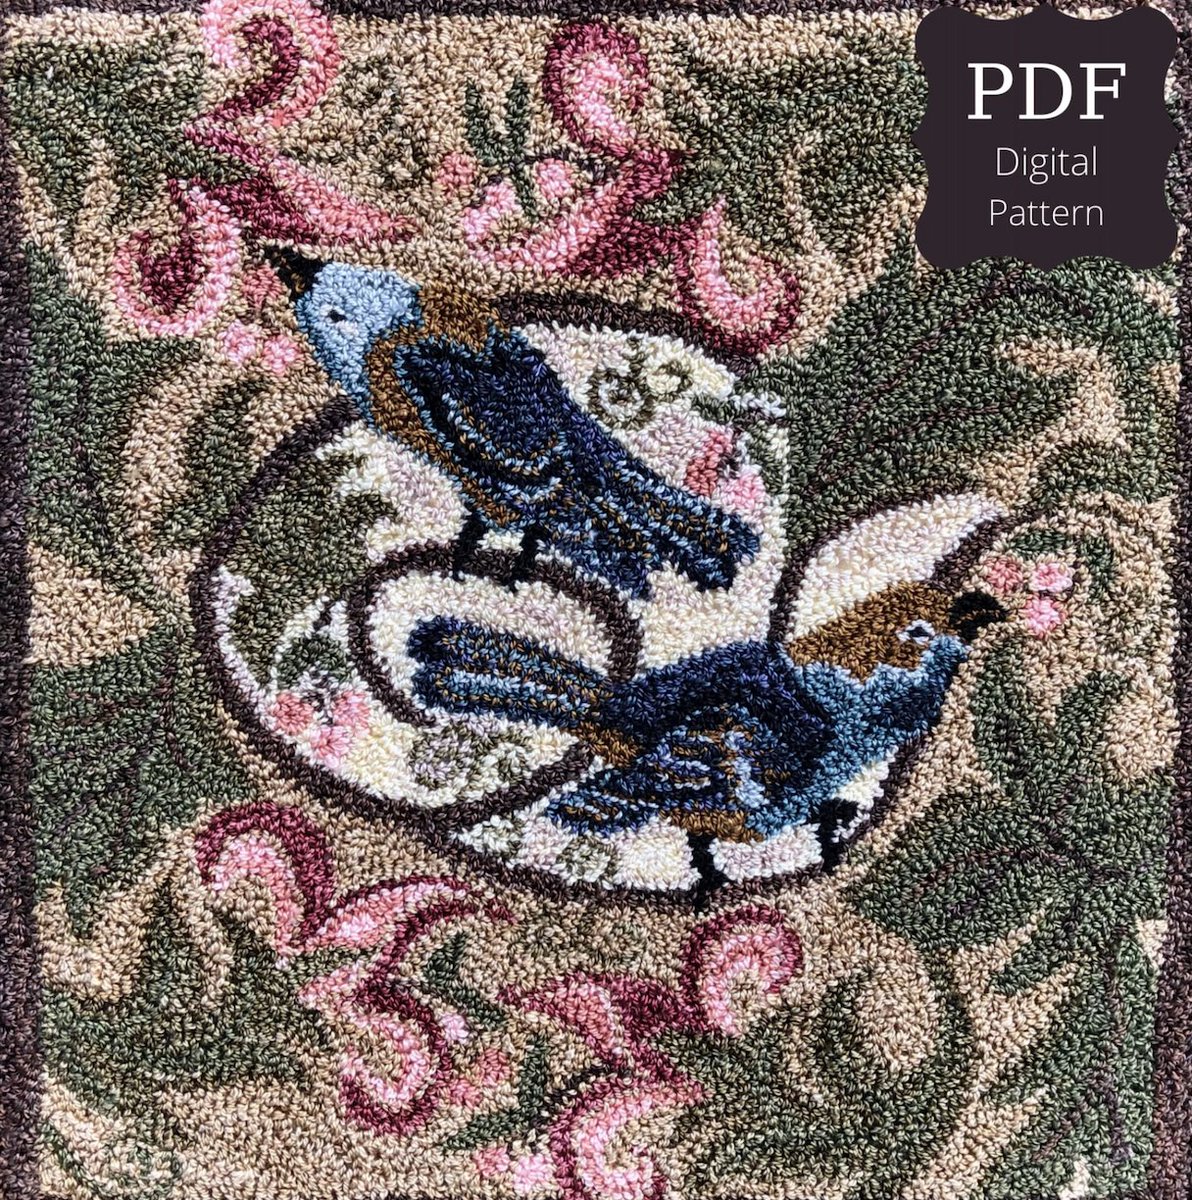 New #punchneedle pattern 'Berry Birds' using #Valdani threads - Kelly Kanyok at Orphaned Wool
orphanedwool.com/collections/di…

#OrphanedWool #embroidery